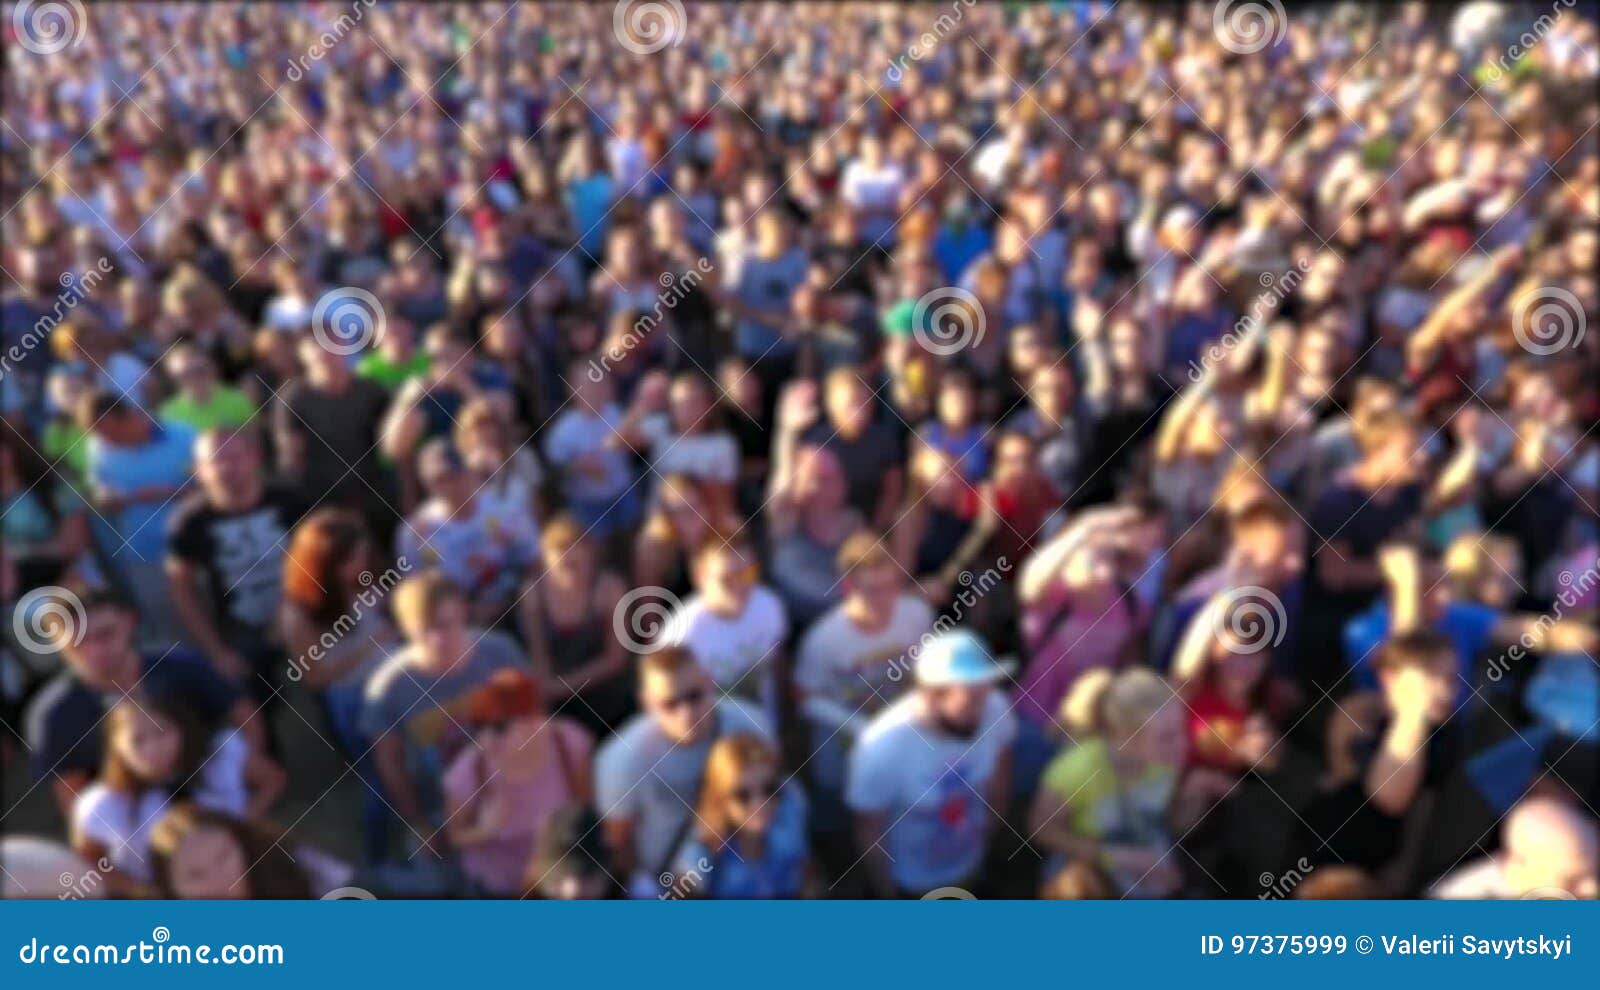 Background for Editing. People at Concert. Stock Video - Video of league,  football: 97375999